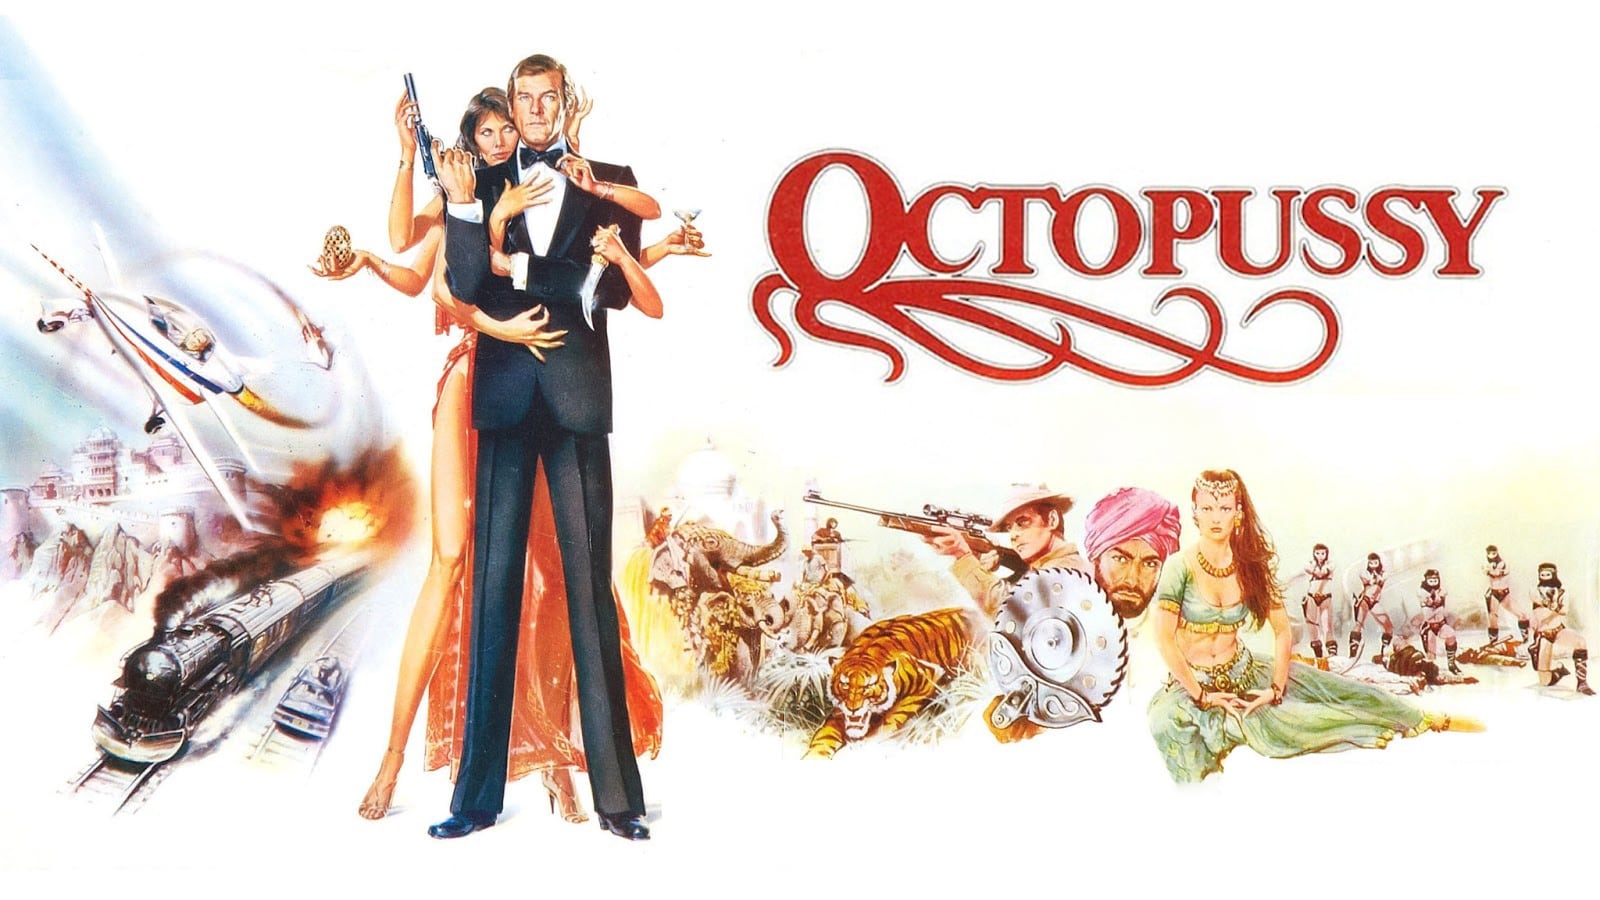 Images from "Octopussy" .